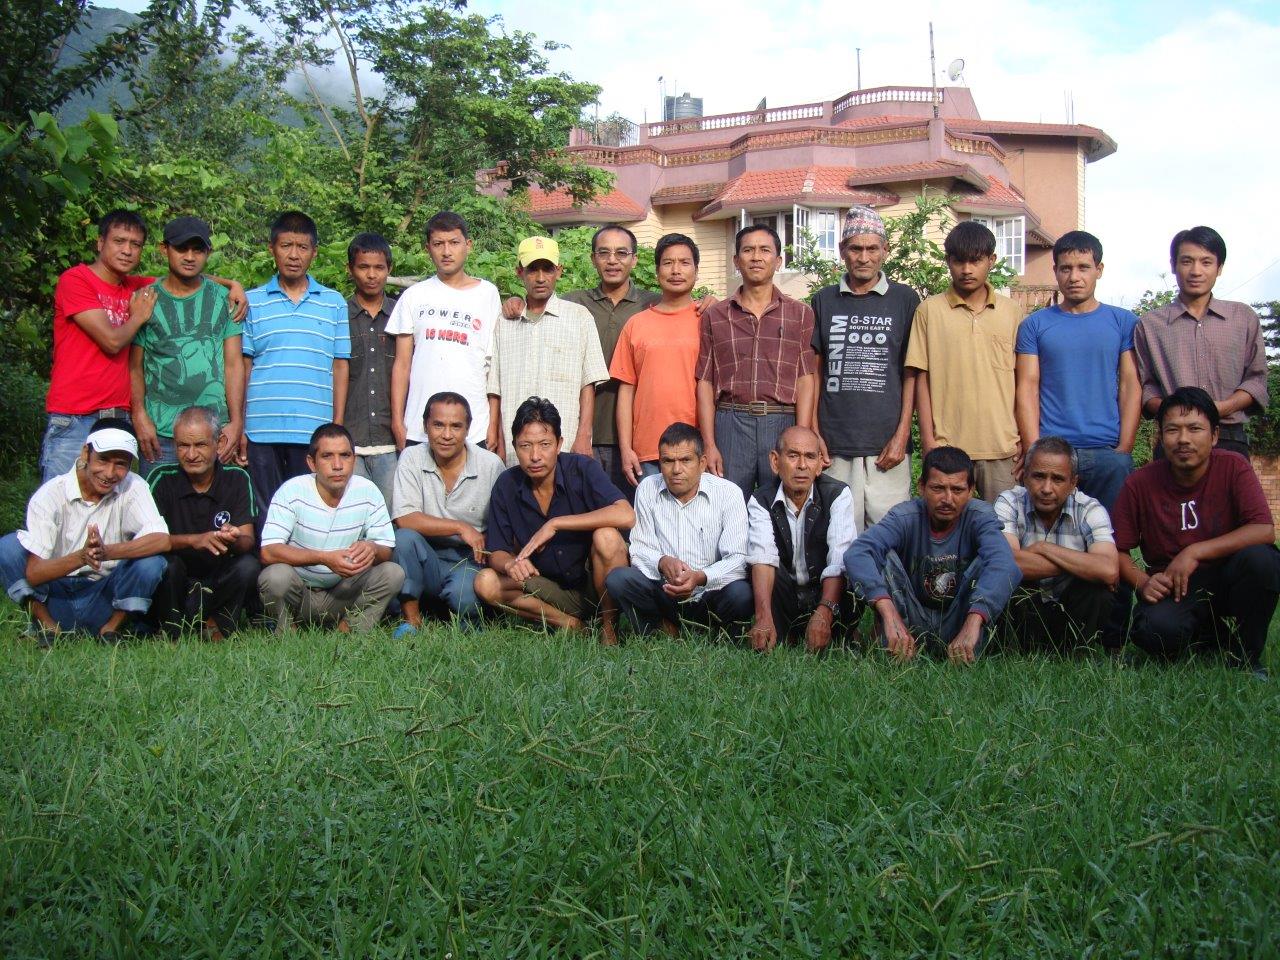 Group picture at the Thankot house